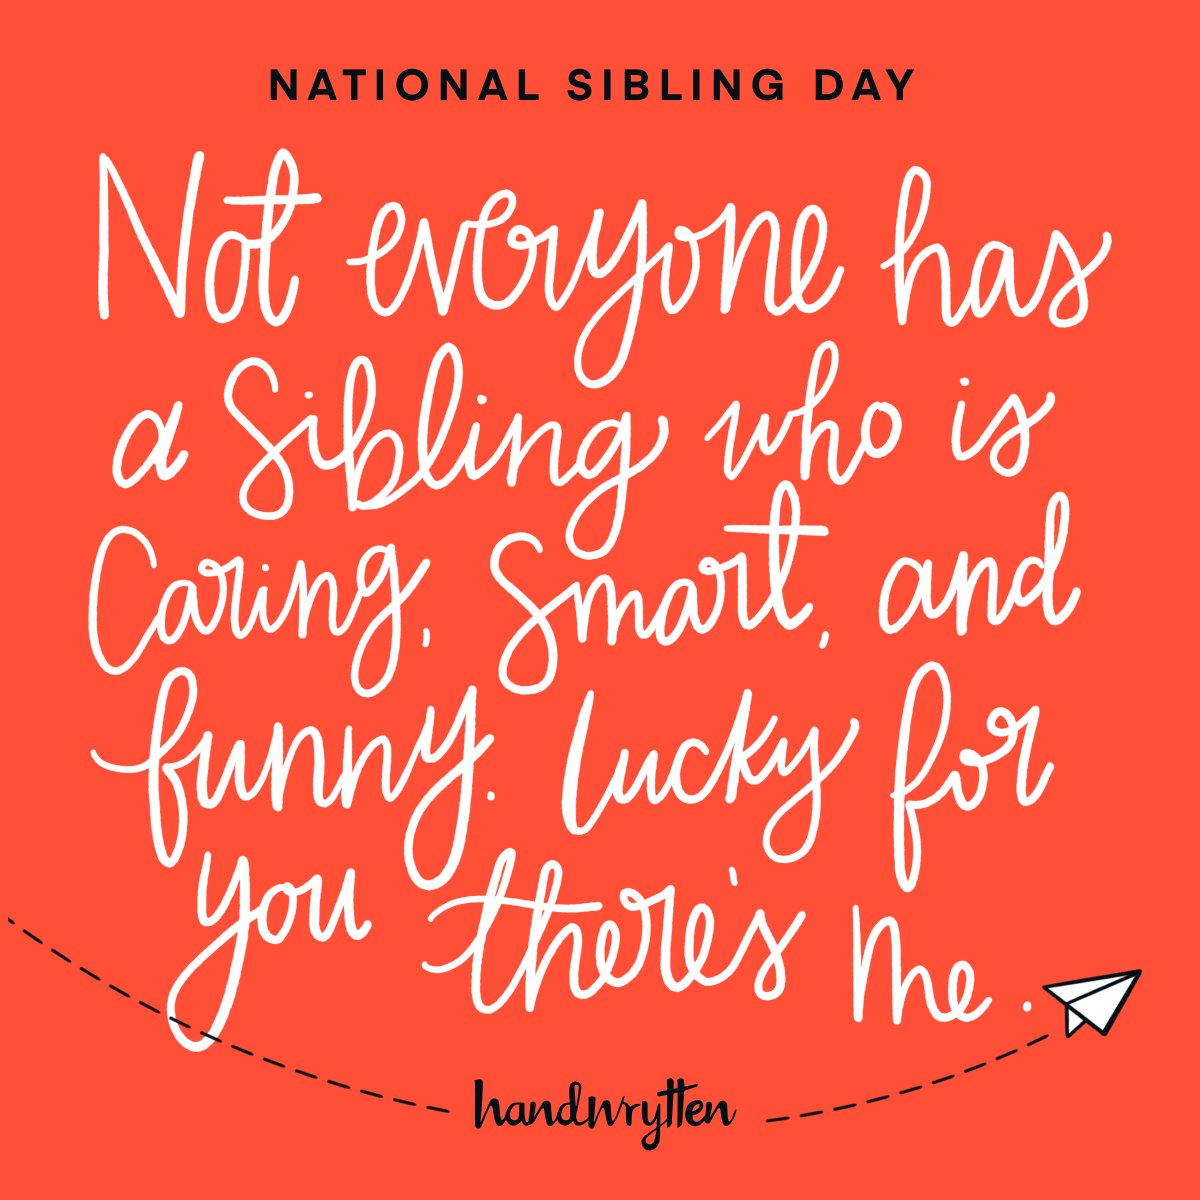 💕🌙Just a friendly evening nudge: Have you checked in with your siblings today? If not, seize the chance to send a heartfelt handwritten card. And yes... you still need to give them a call! 😄

#SiblingLove #FamilyFirst #HandwrittenNotes #SiblingBond #NationalSiblingDay